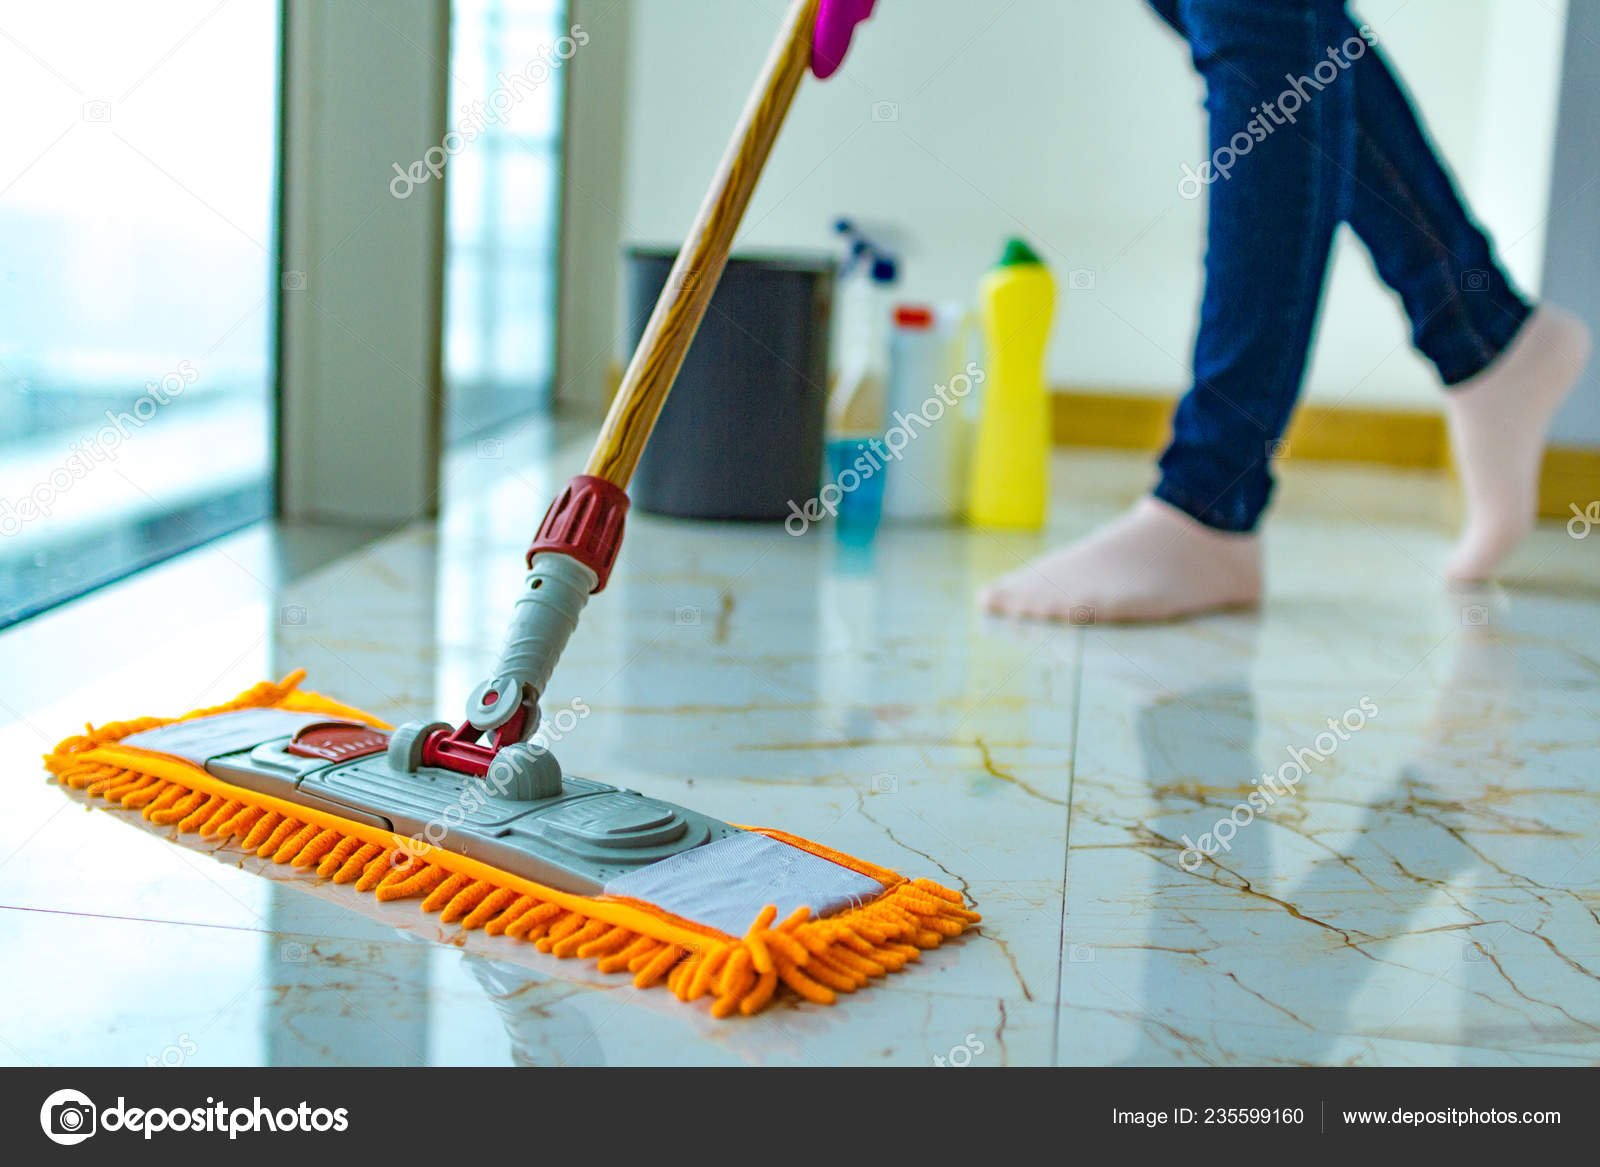 https://st4.depositphotos.com/18922288/23559/i/1600/depositphotos_235599160-stock-photo-disinfectants-products-cleaning-house-mopping.jpg